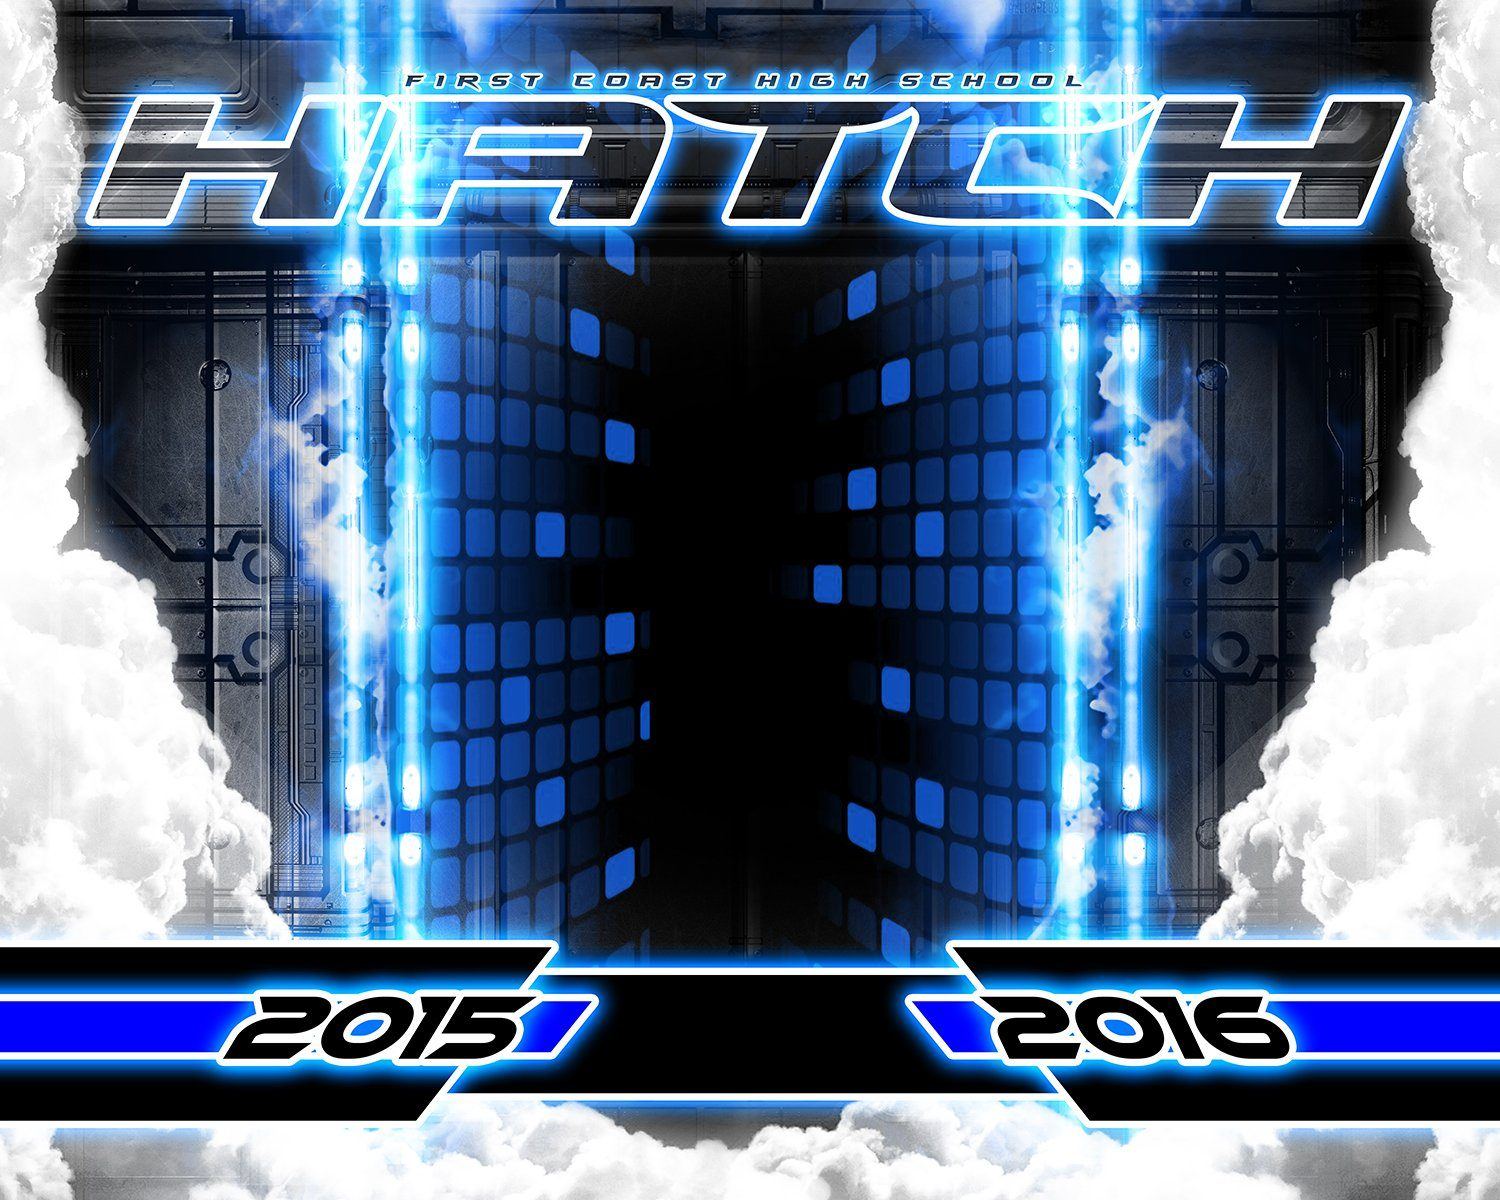 Hatch v.5 - Xtreme Team-Photoshop Template - Photo Solutions